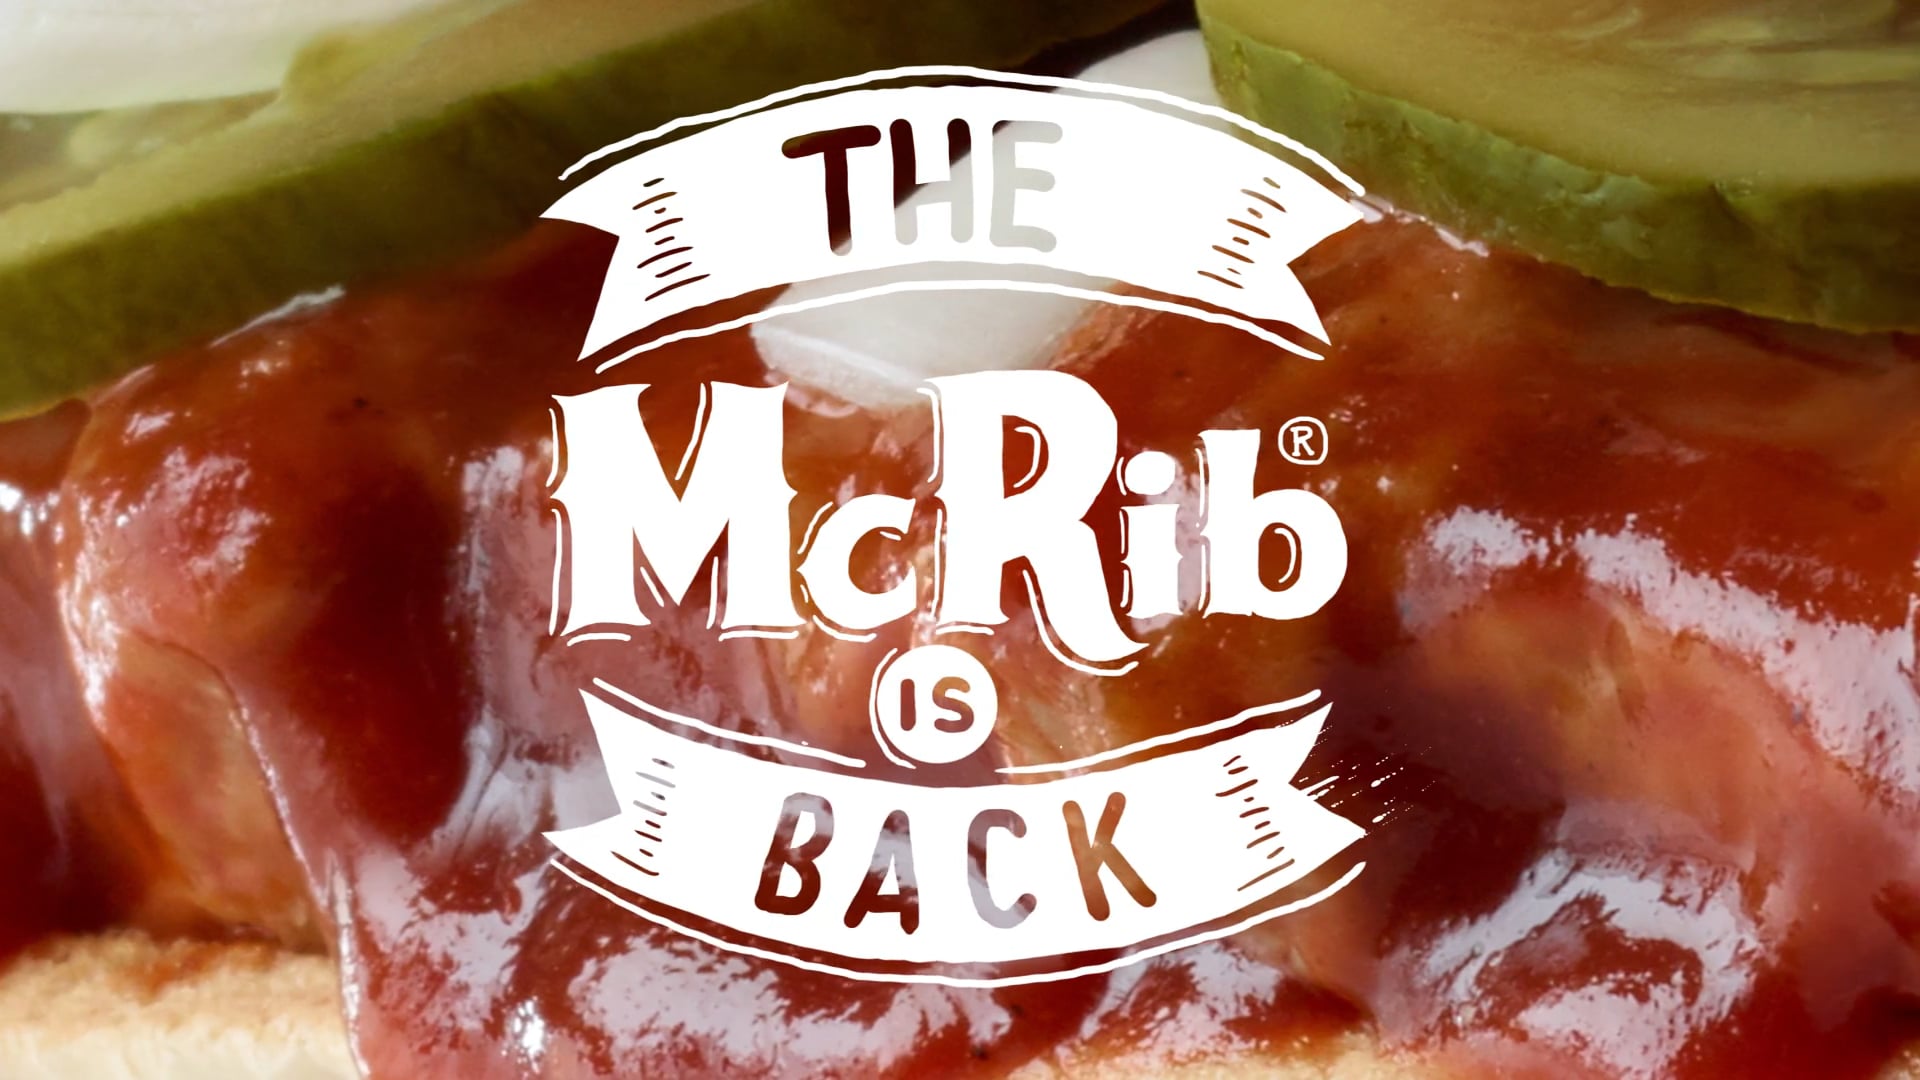 We Are Unlimited | McDonald's | The Last McRib